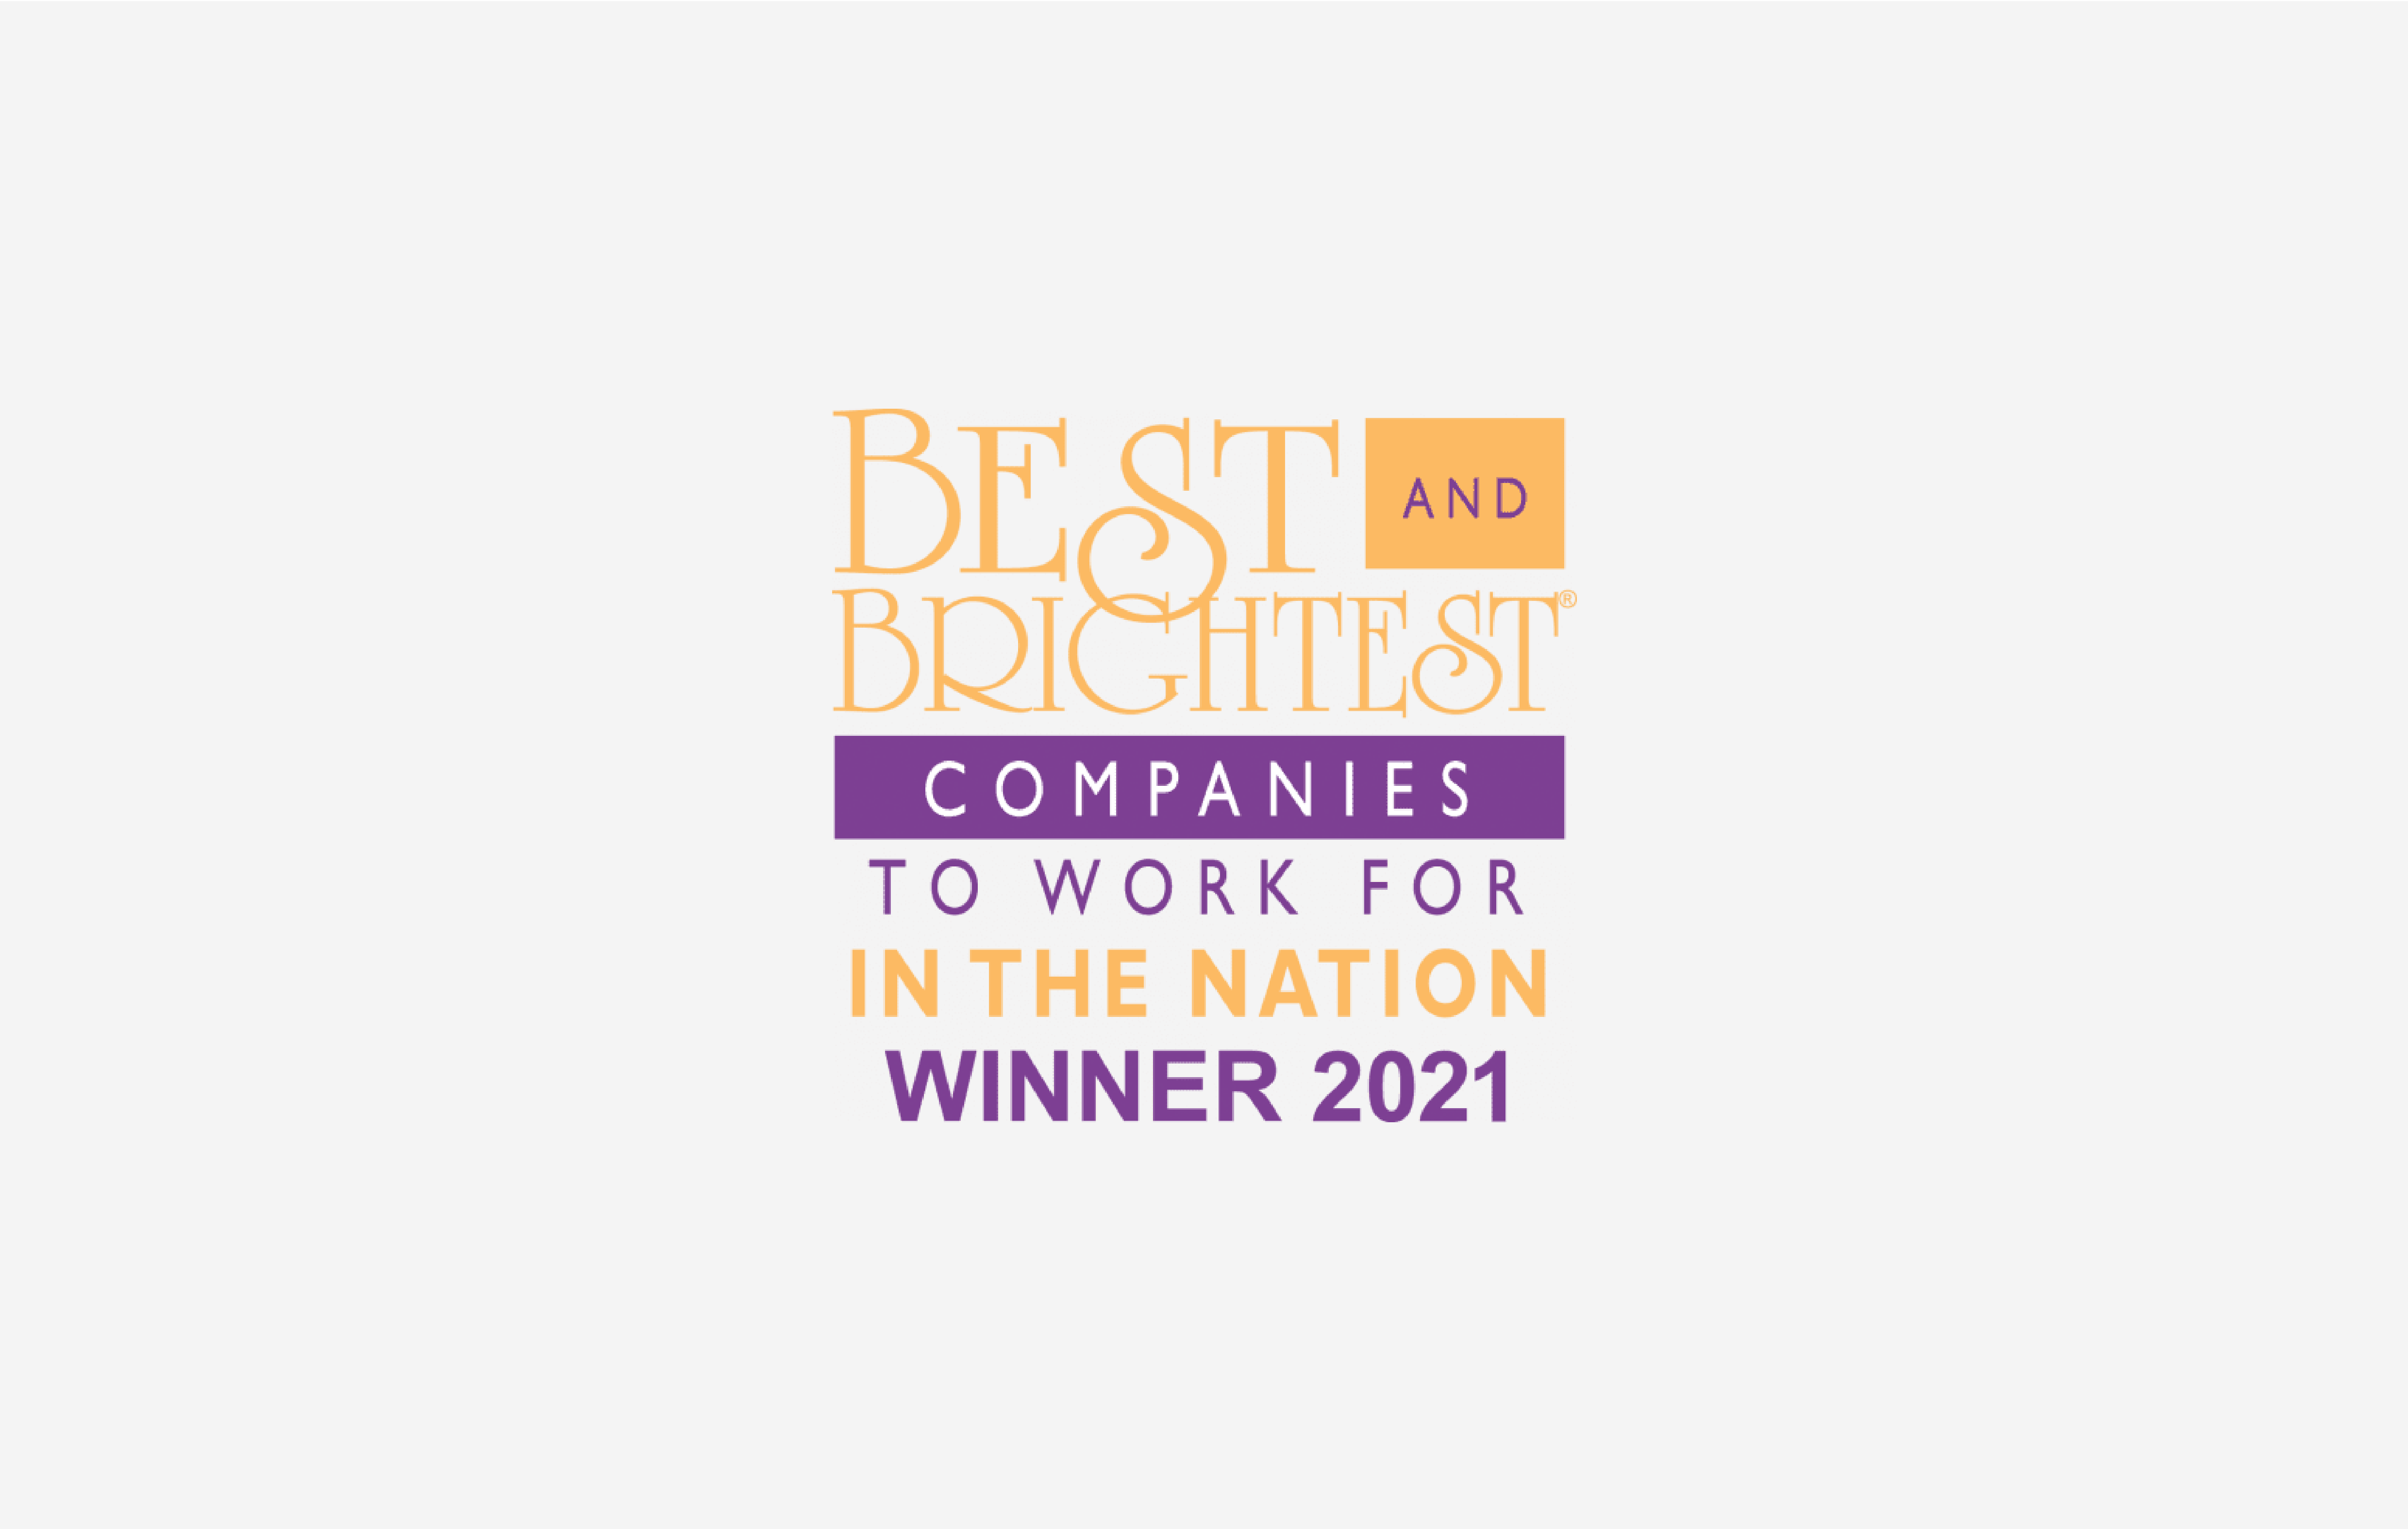 KIRCO named among the “Best and Brightest Companies to Work For in the Nation” in 2021